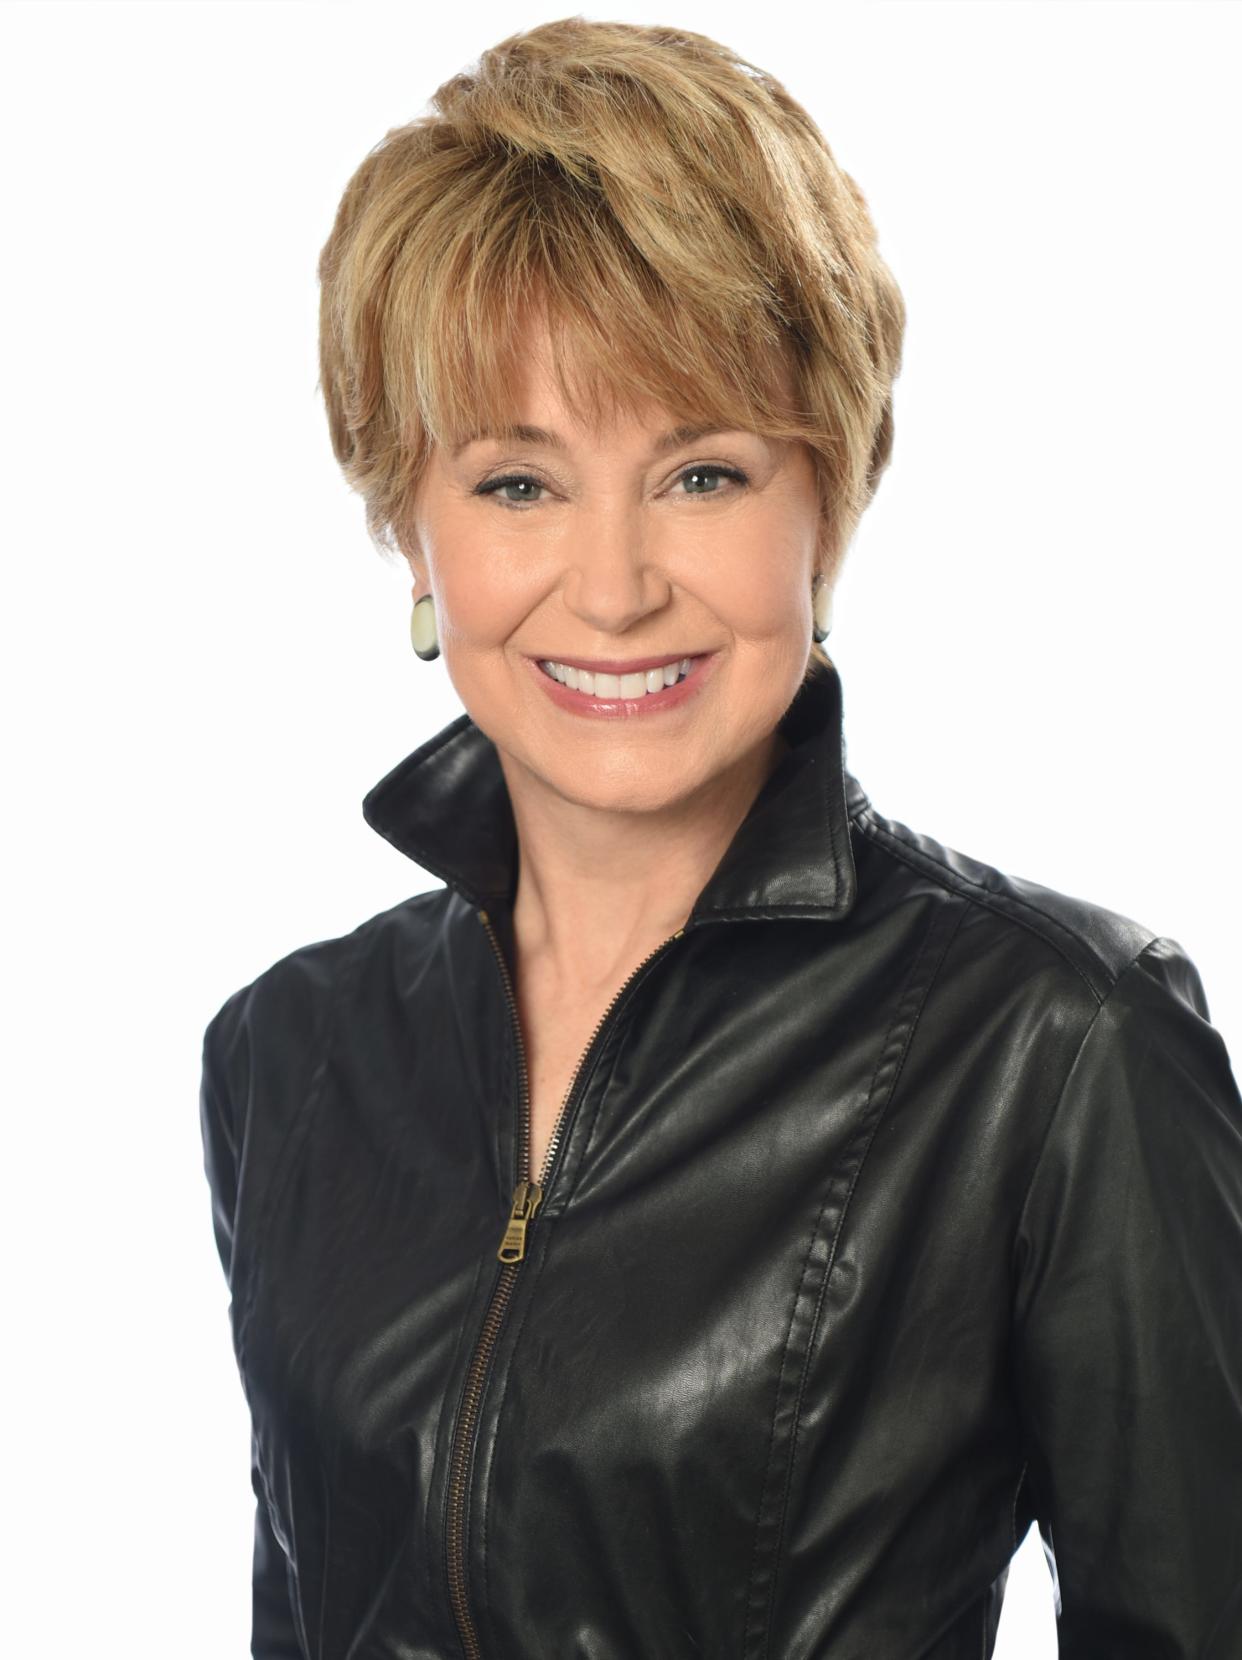 Longtime CBS News personality Jane Pauley will speak March 7 at the "It Will Take All of Us to Cure Parkinson's" luncheon put on by the Michael J. Fox Foundation. The event is at 11:30 a.m. at the Sailfish Club.